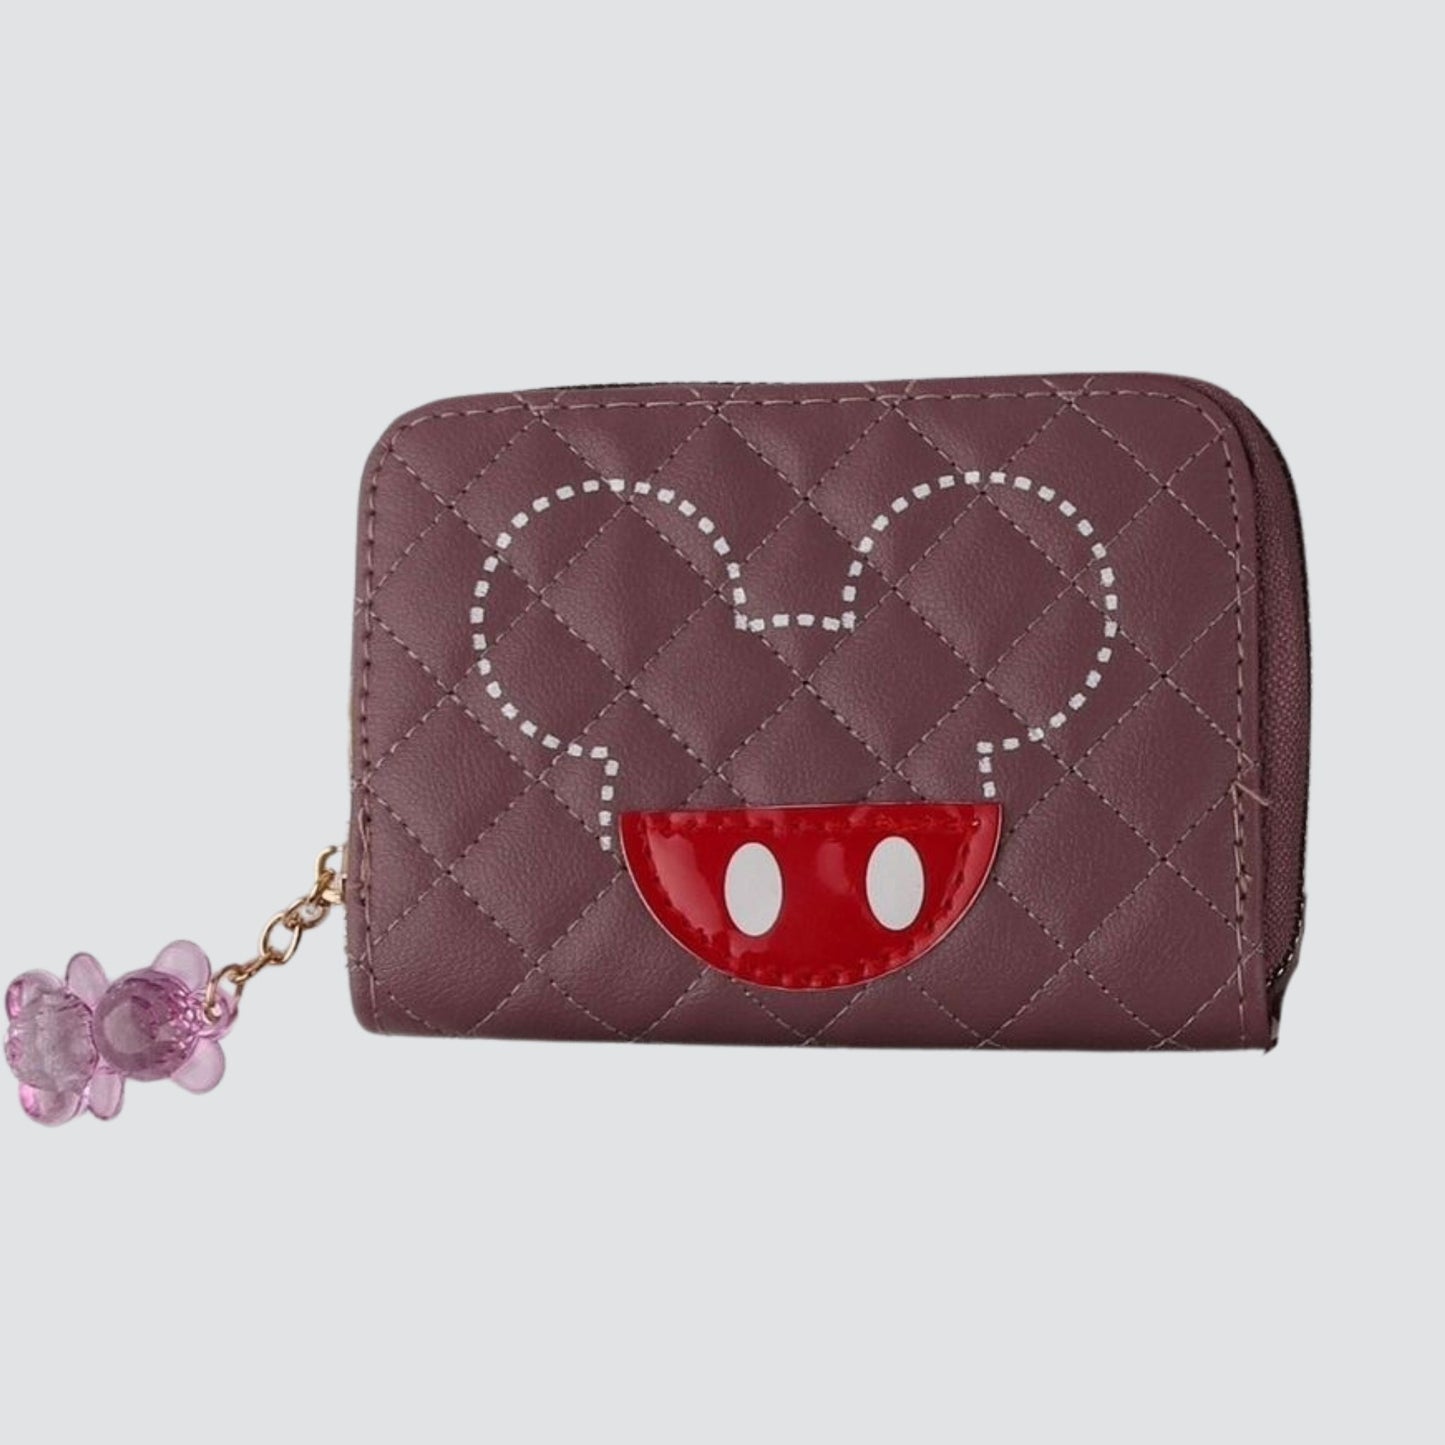 Rose Minnie Mouse Mini Wallet